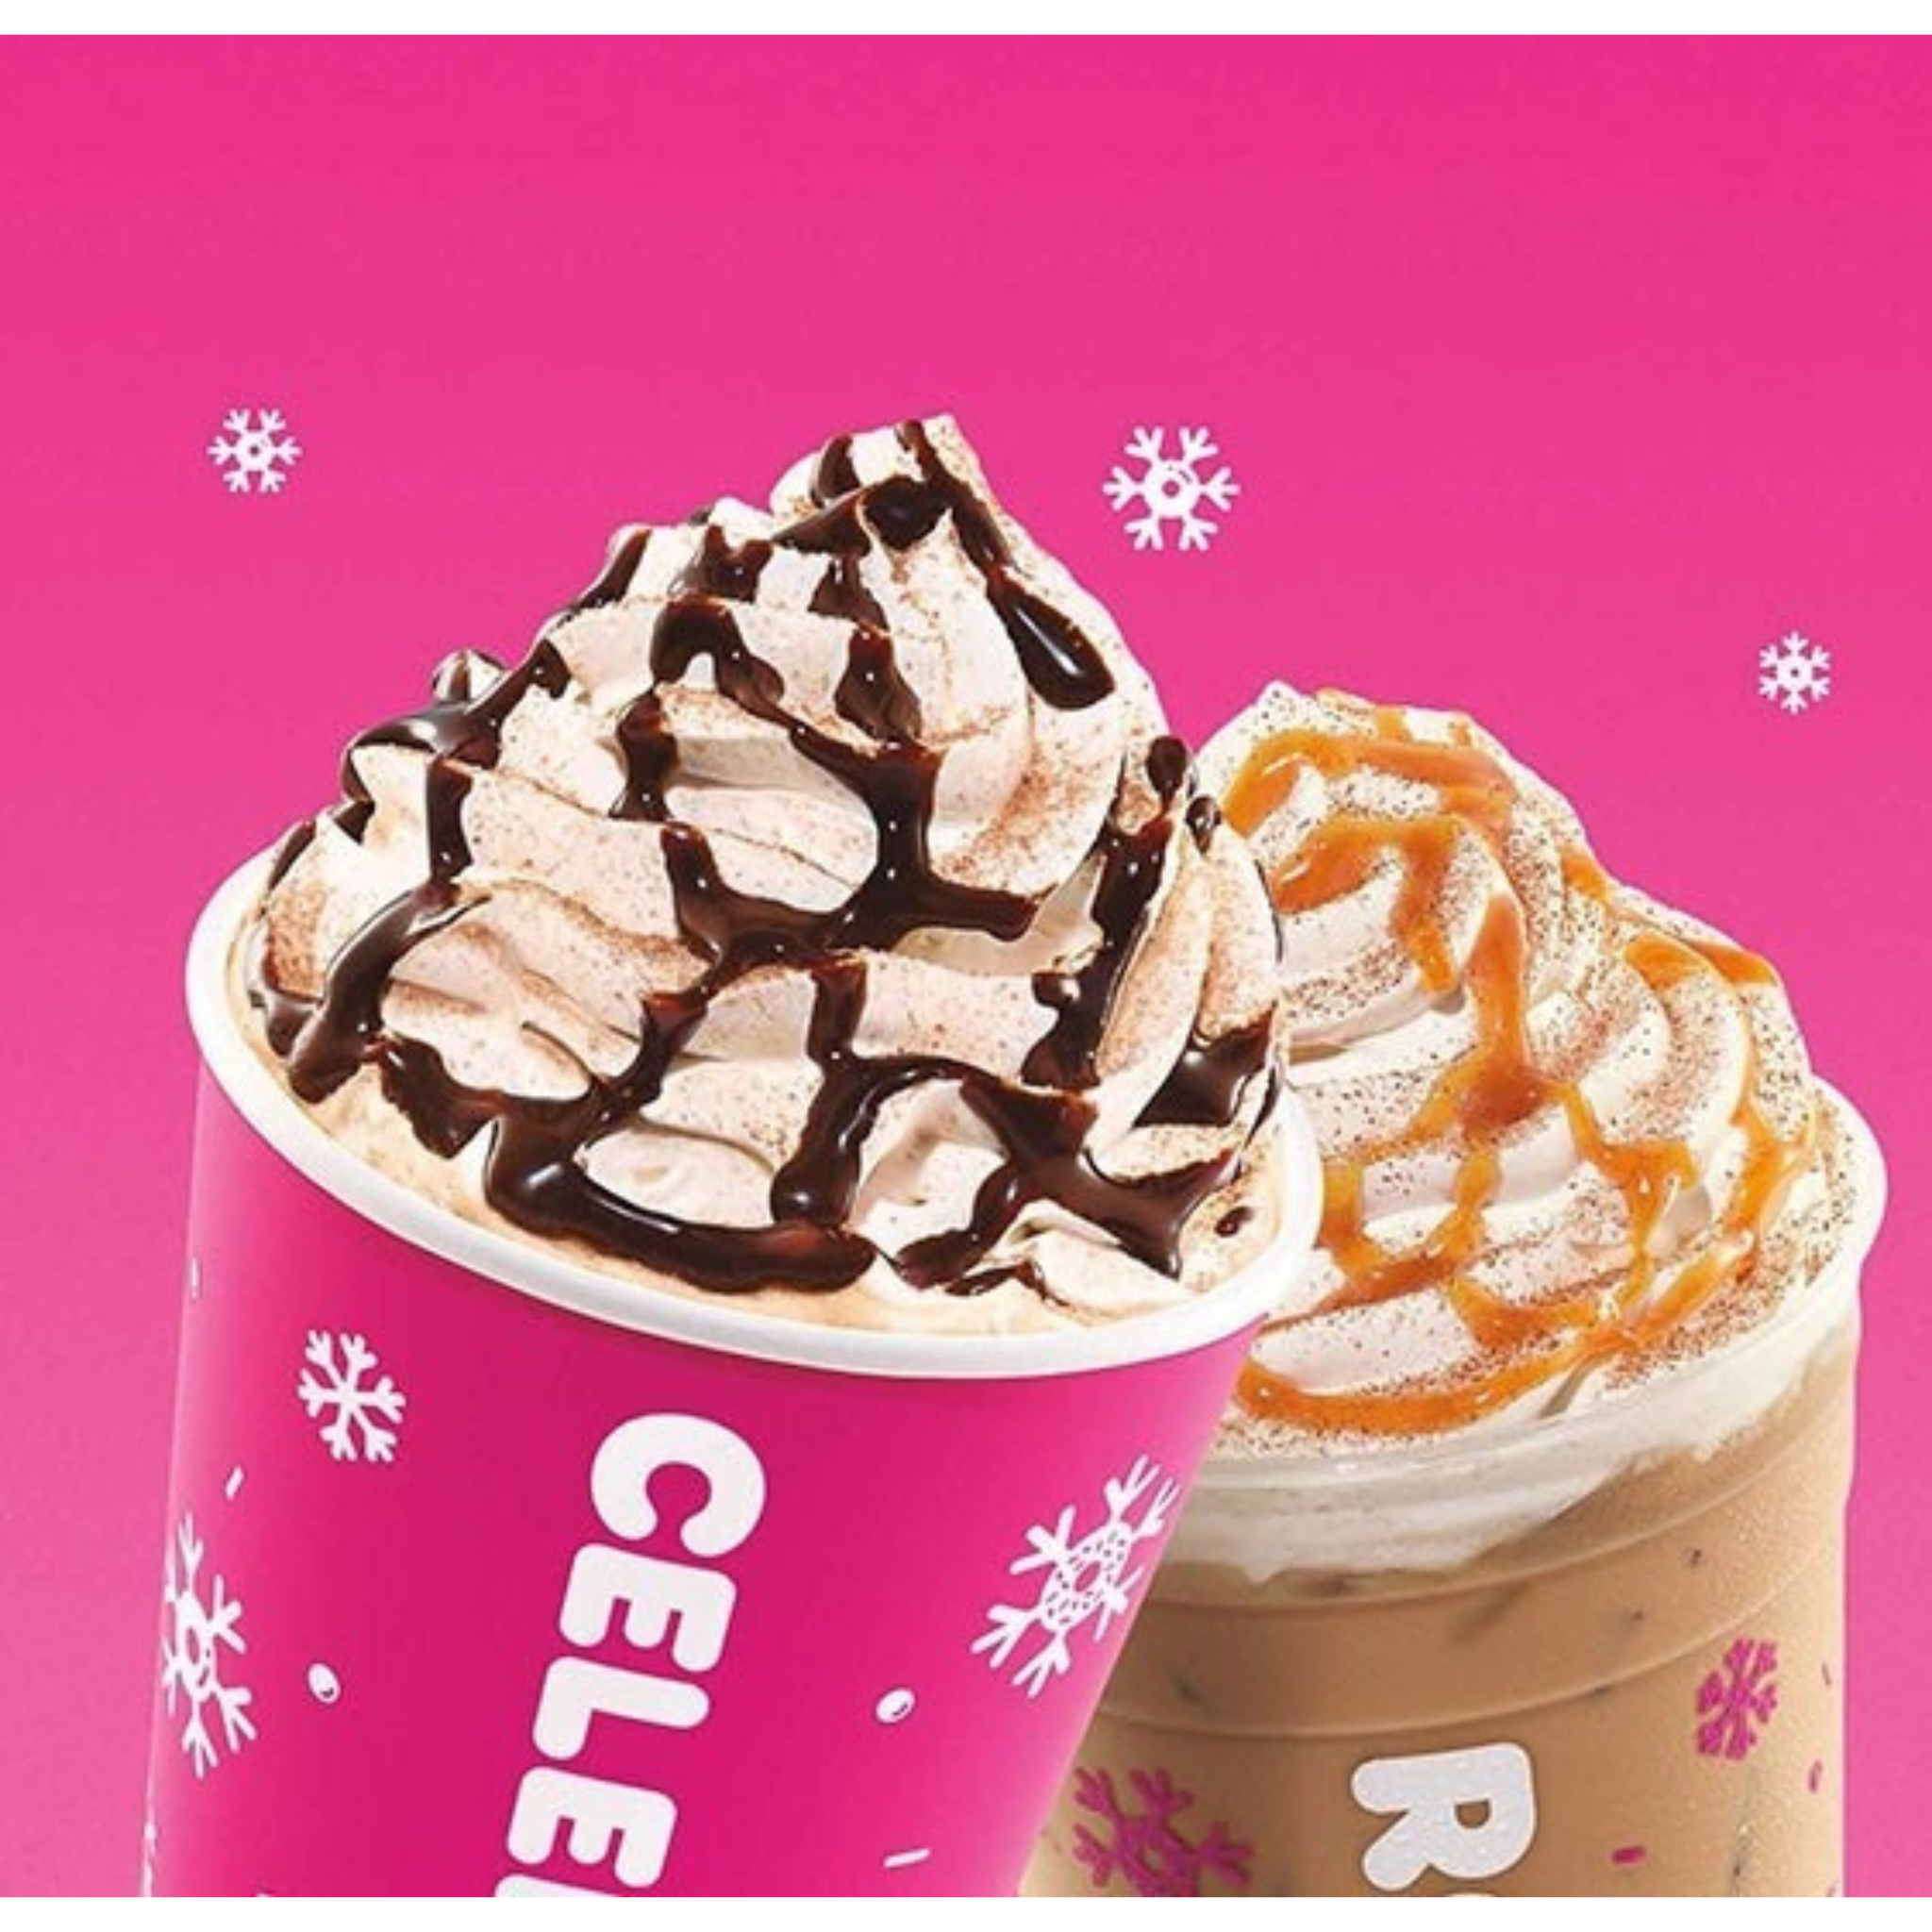 Free Signature Latte Or Frozen Drink From Dunkin!